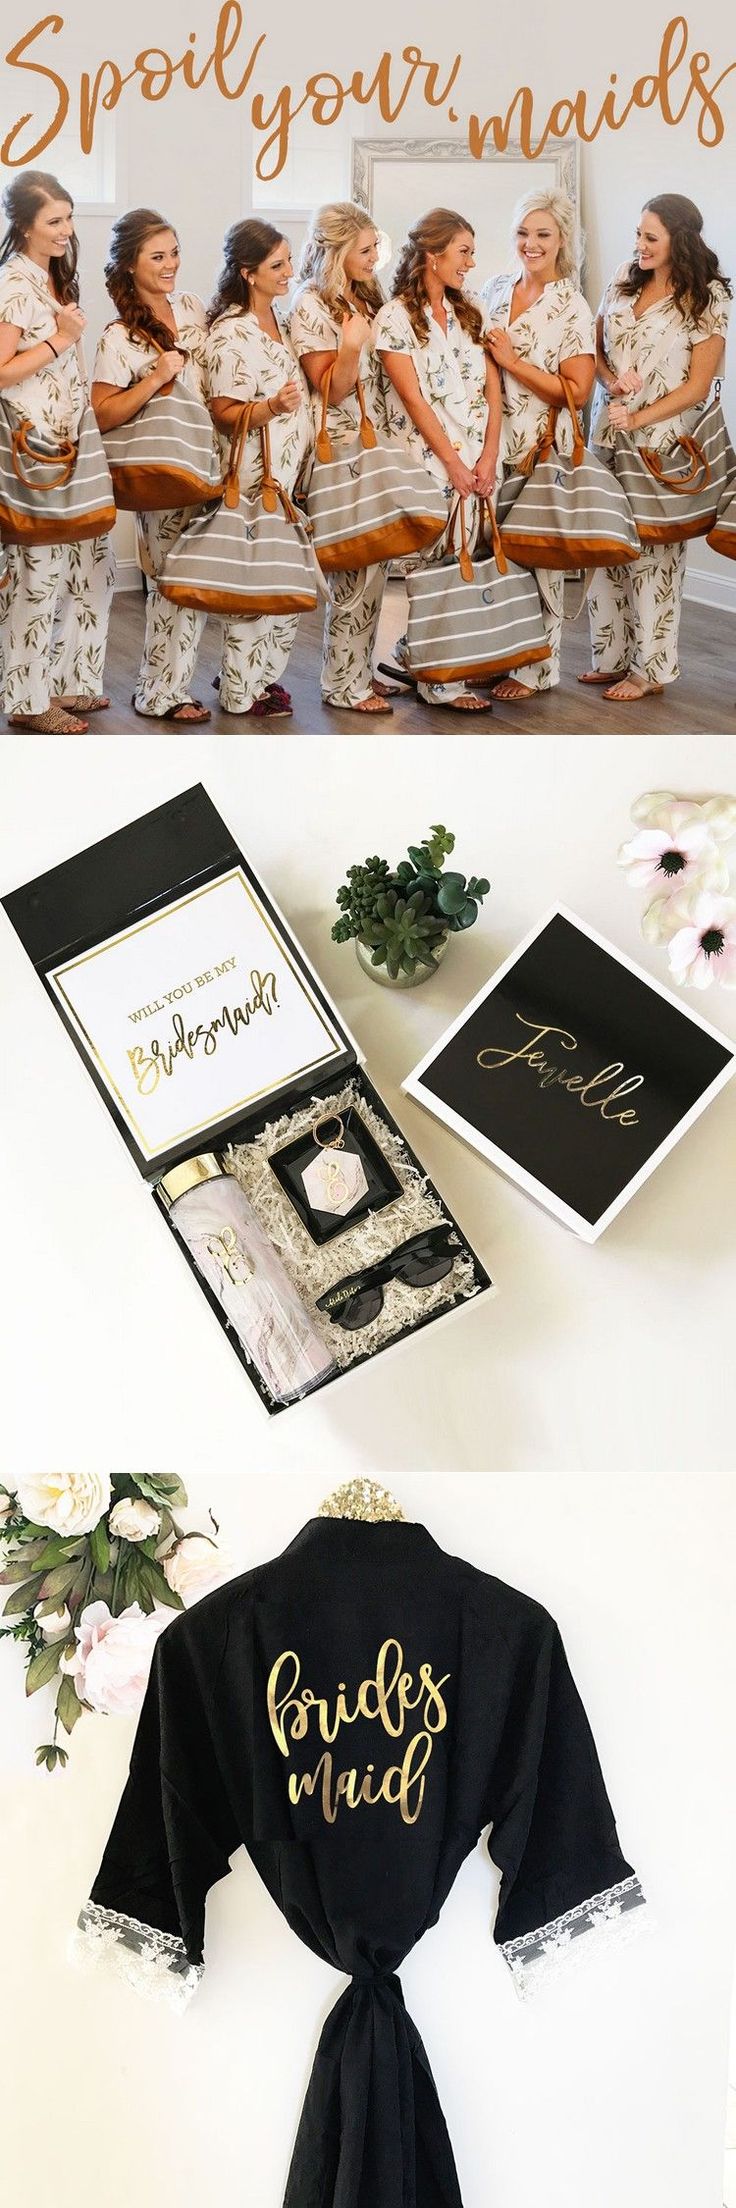 Bridesmaid Gifts Ideas - Unique personalized gift ideas your bridesmaids can use...